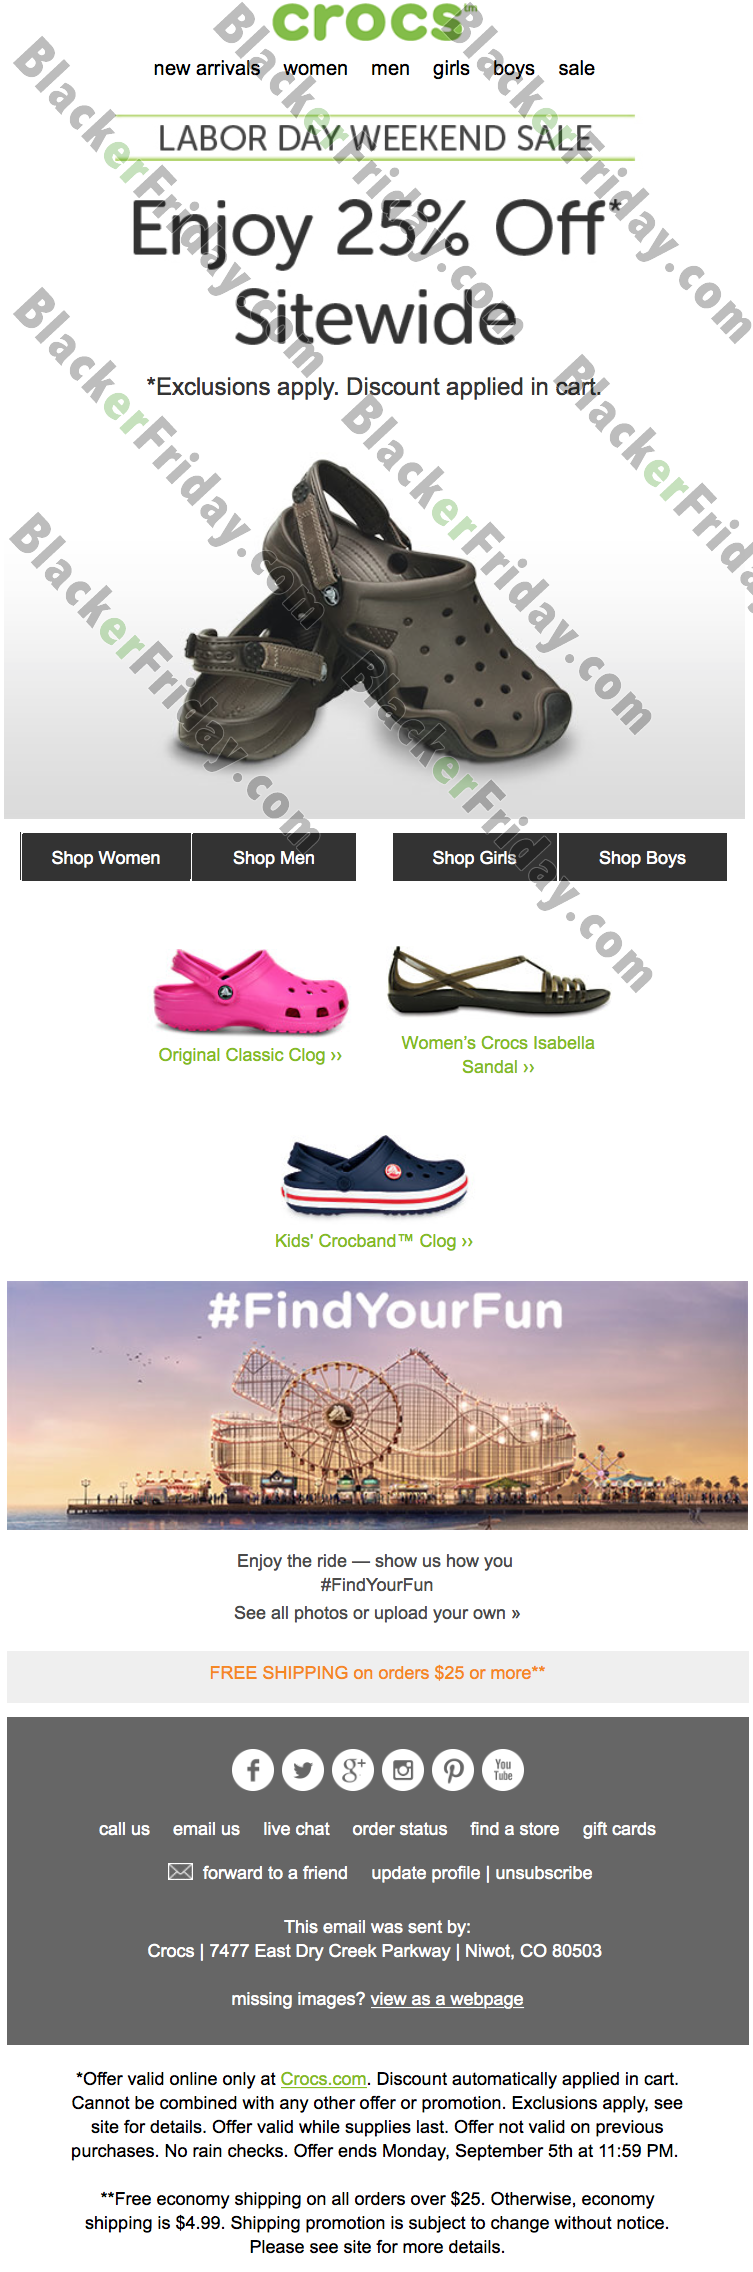 Crocs Labor Day Sale 2020 - What to 